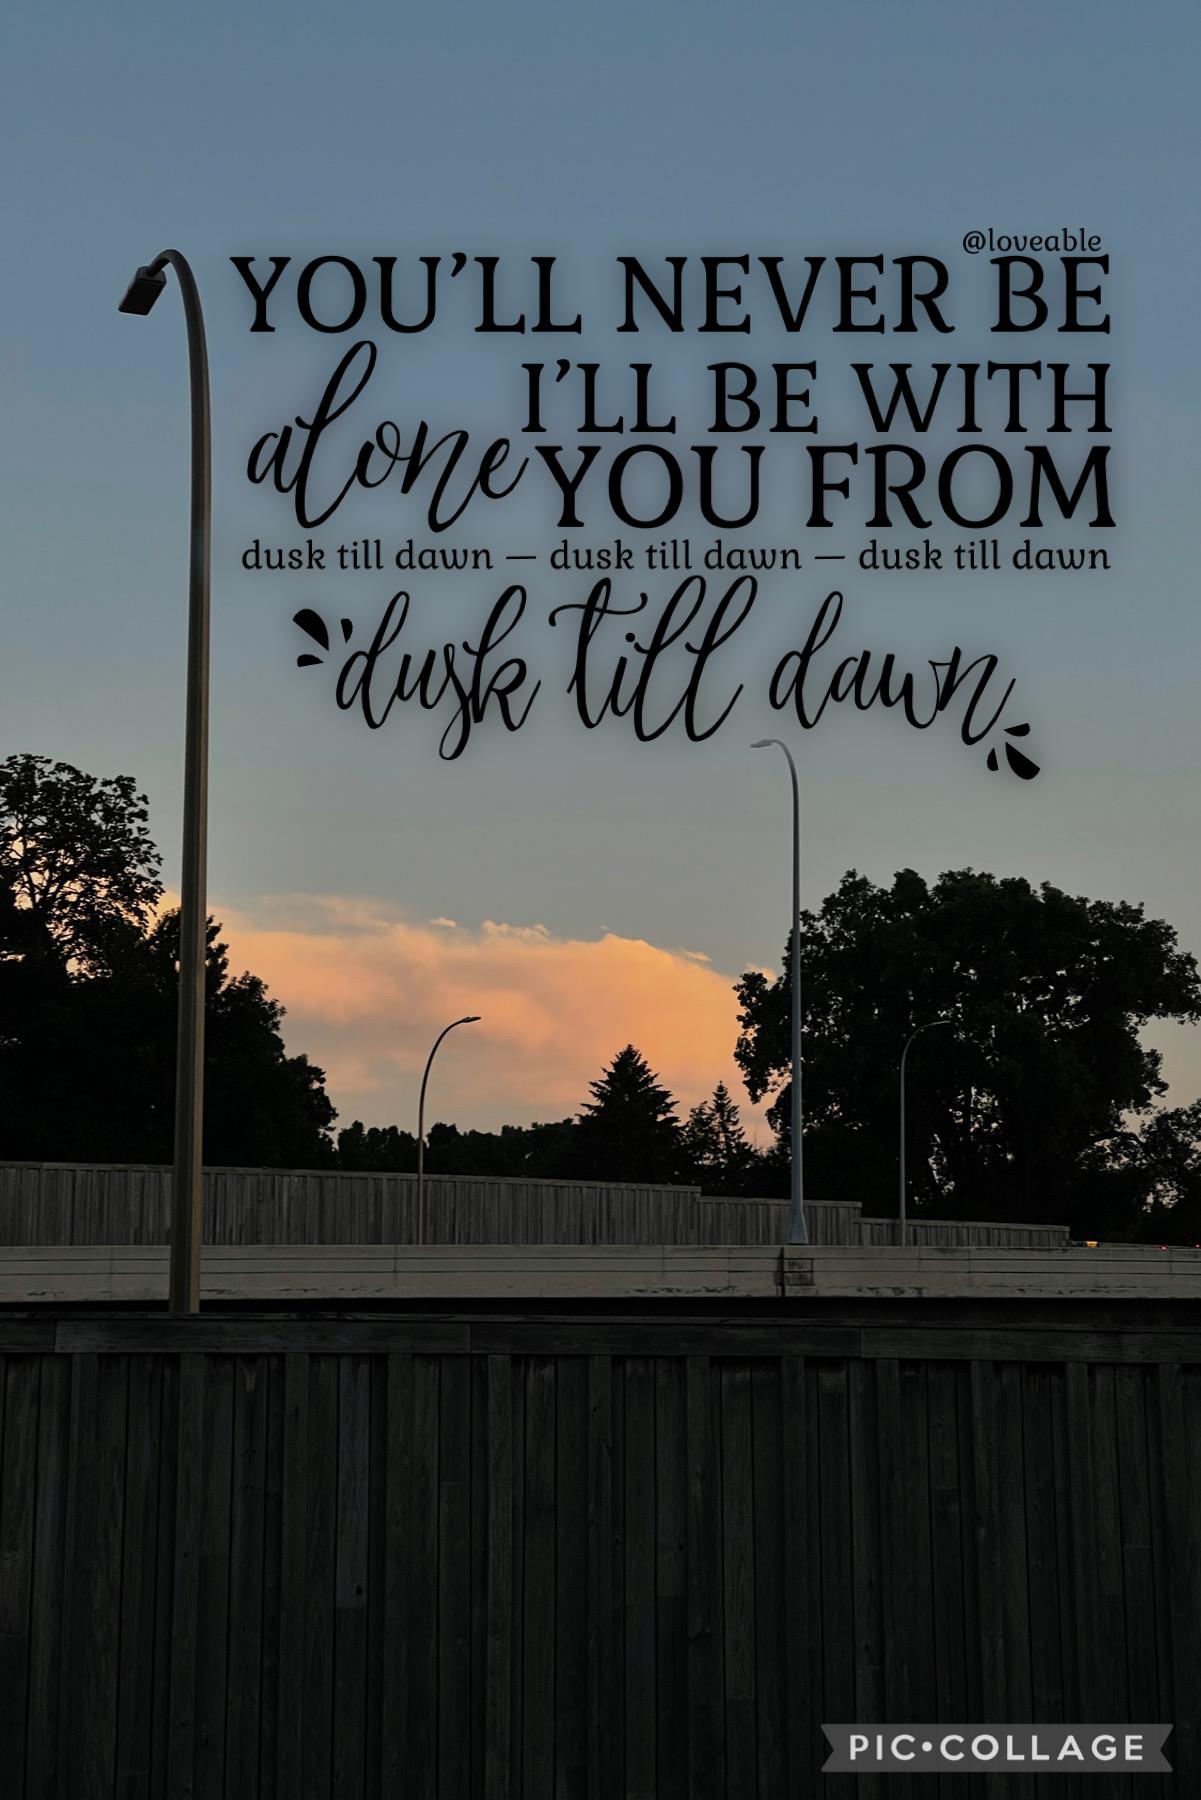 my guilty pleasure is bittersweet song lyrics collages… I do like the new fonts we for though 